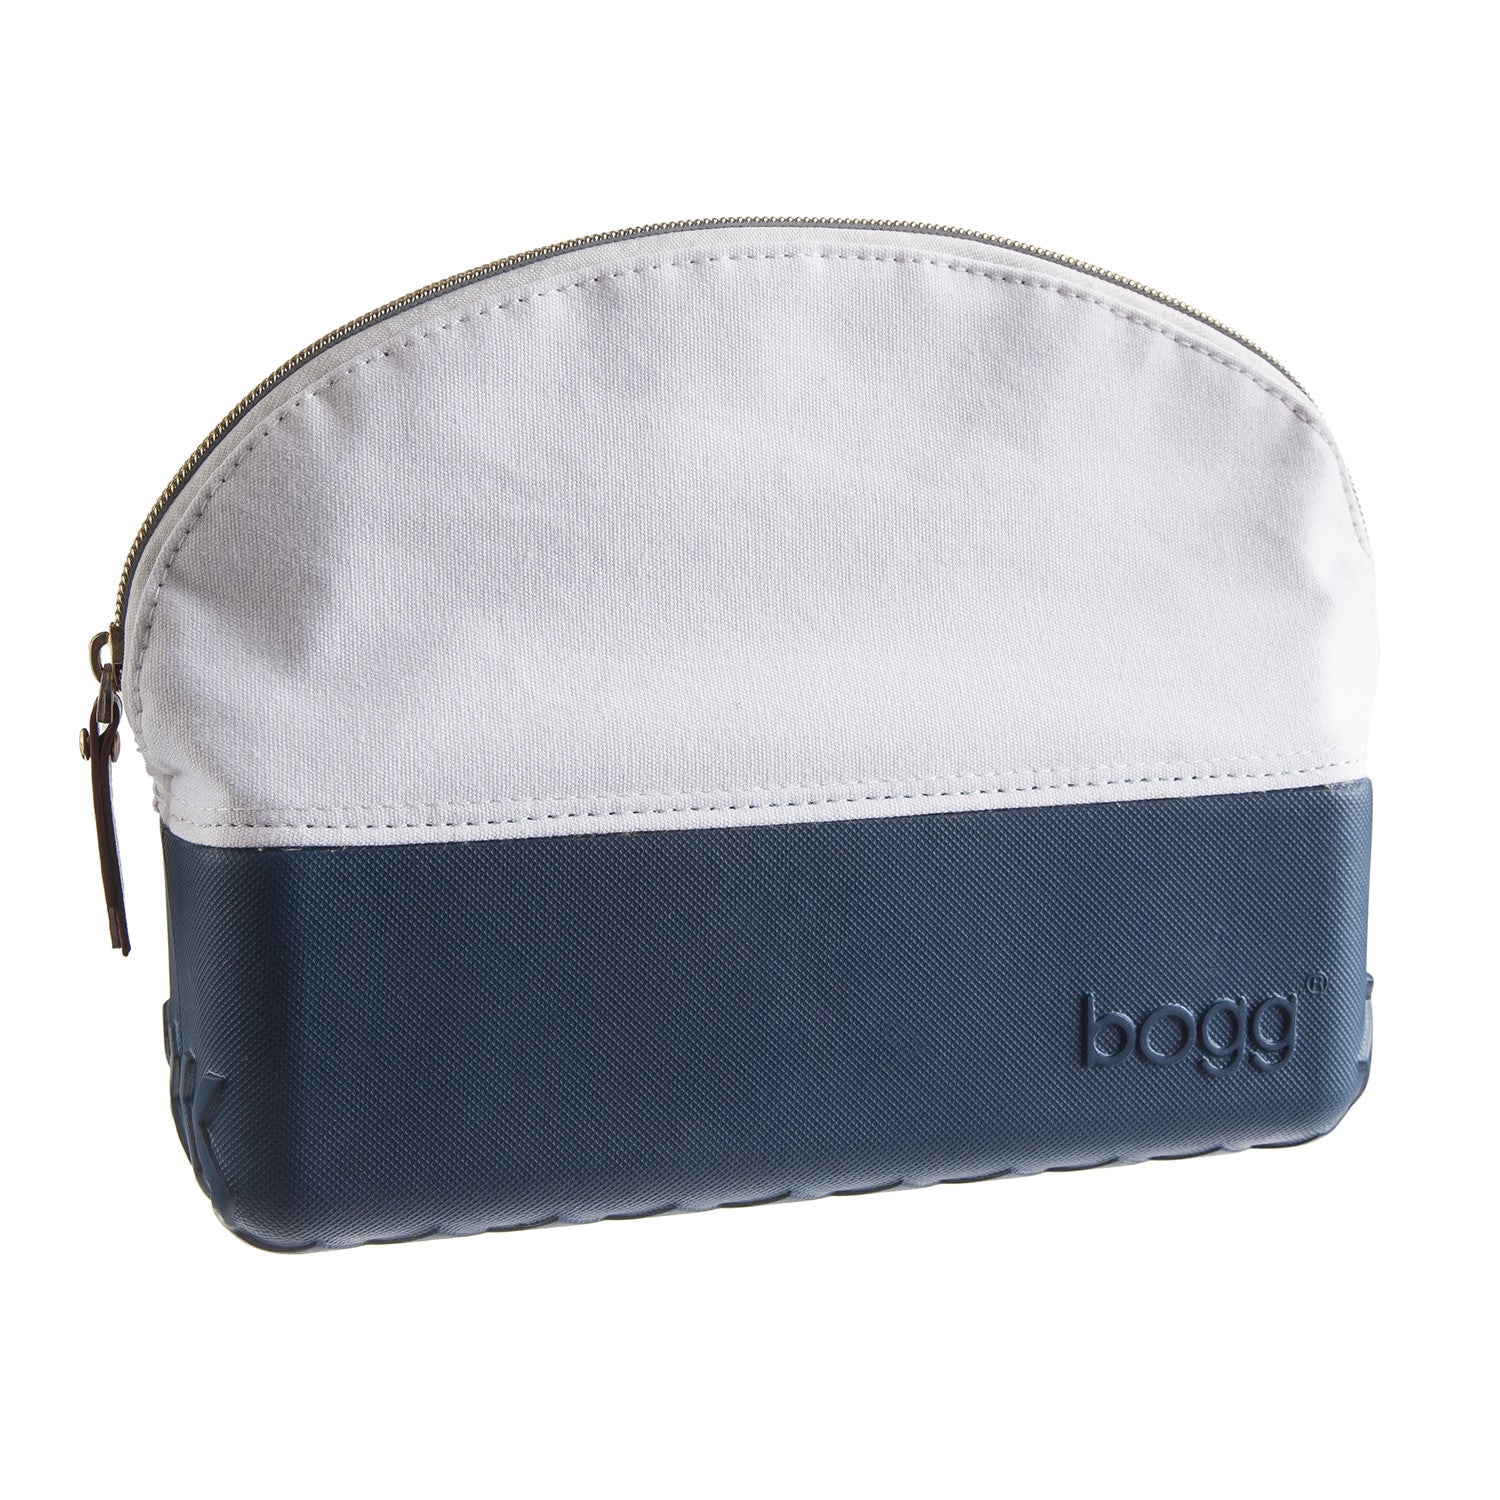 Beauty and the Bogg® – BOGG BAG